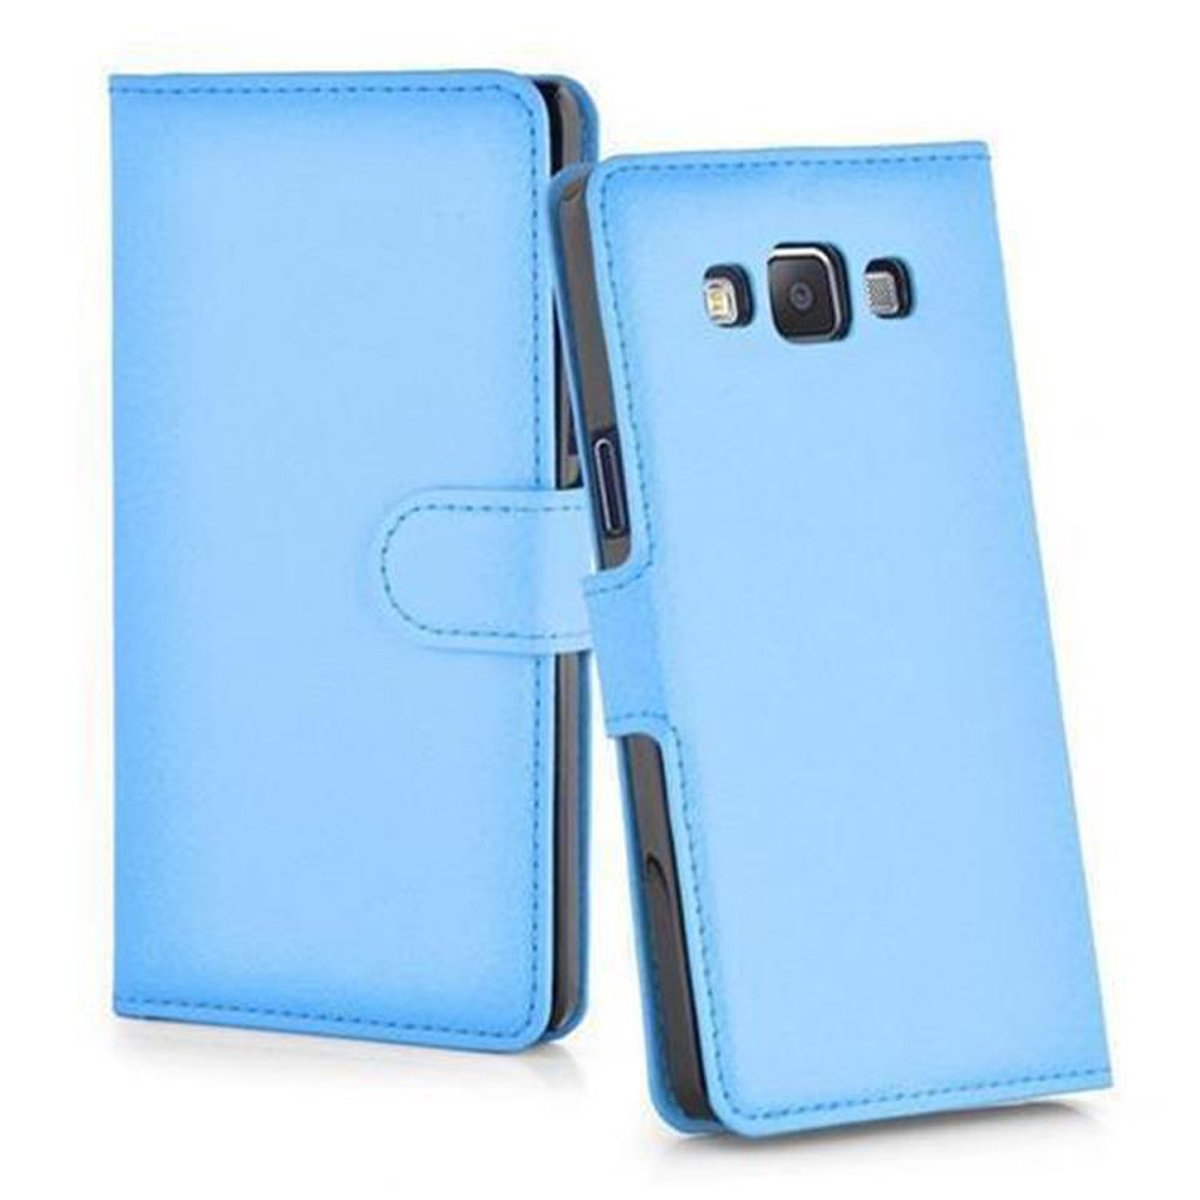 PASTELL Galaxy Book Bookcover, 2015, BLAU Standfunktion, A3 Hülle CADORABO Samsung,